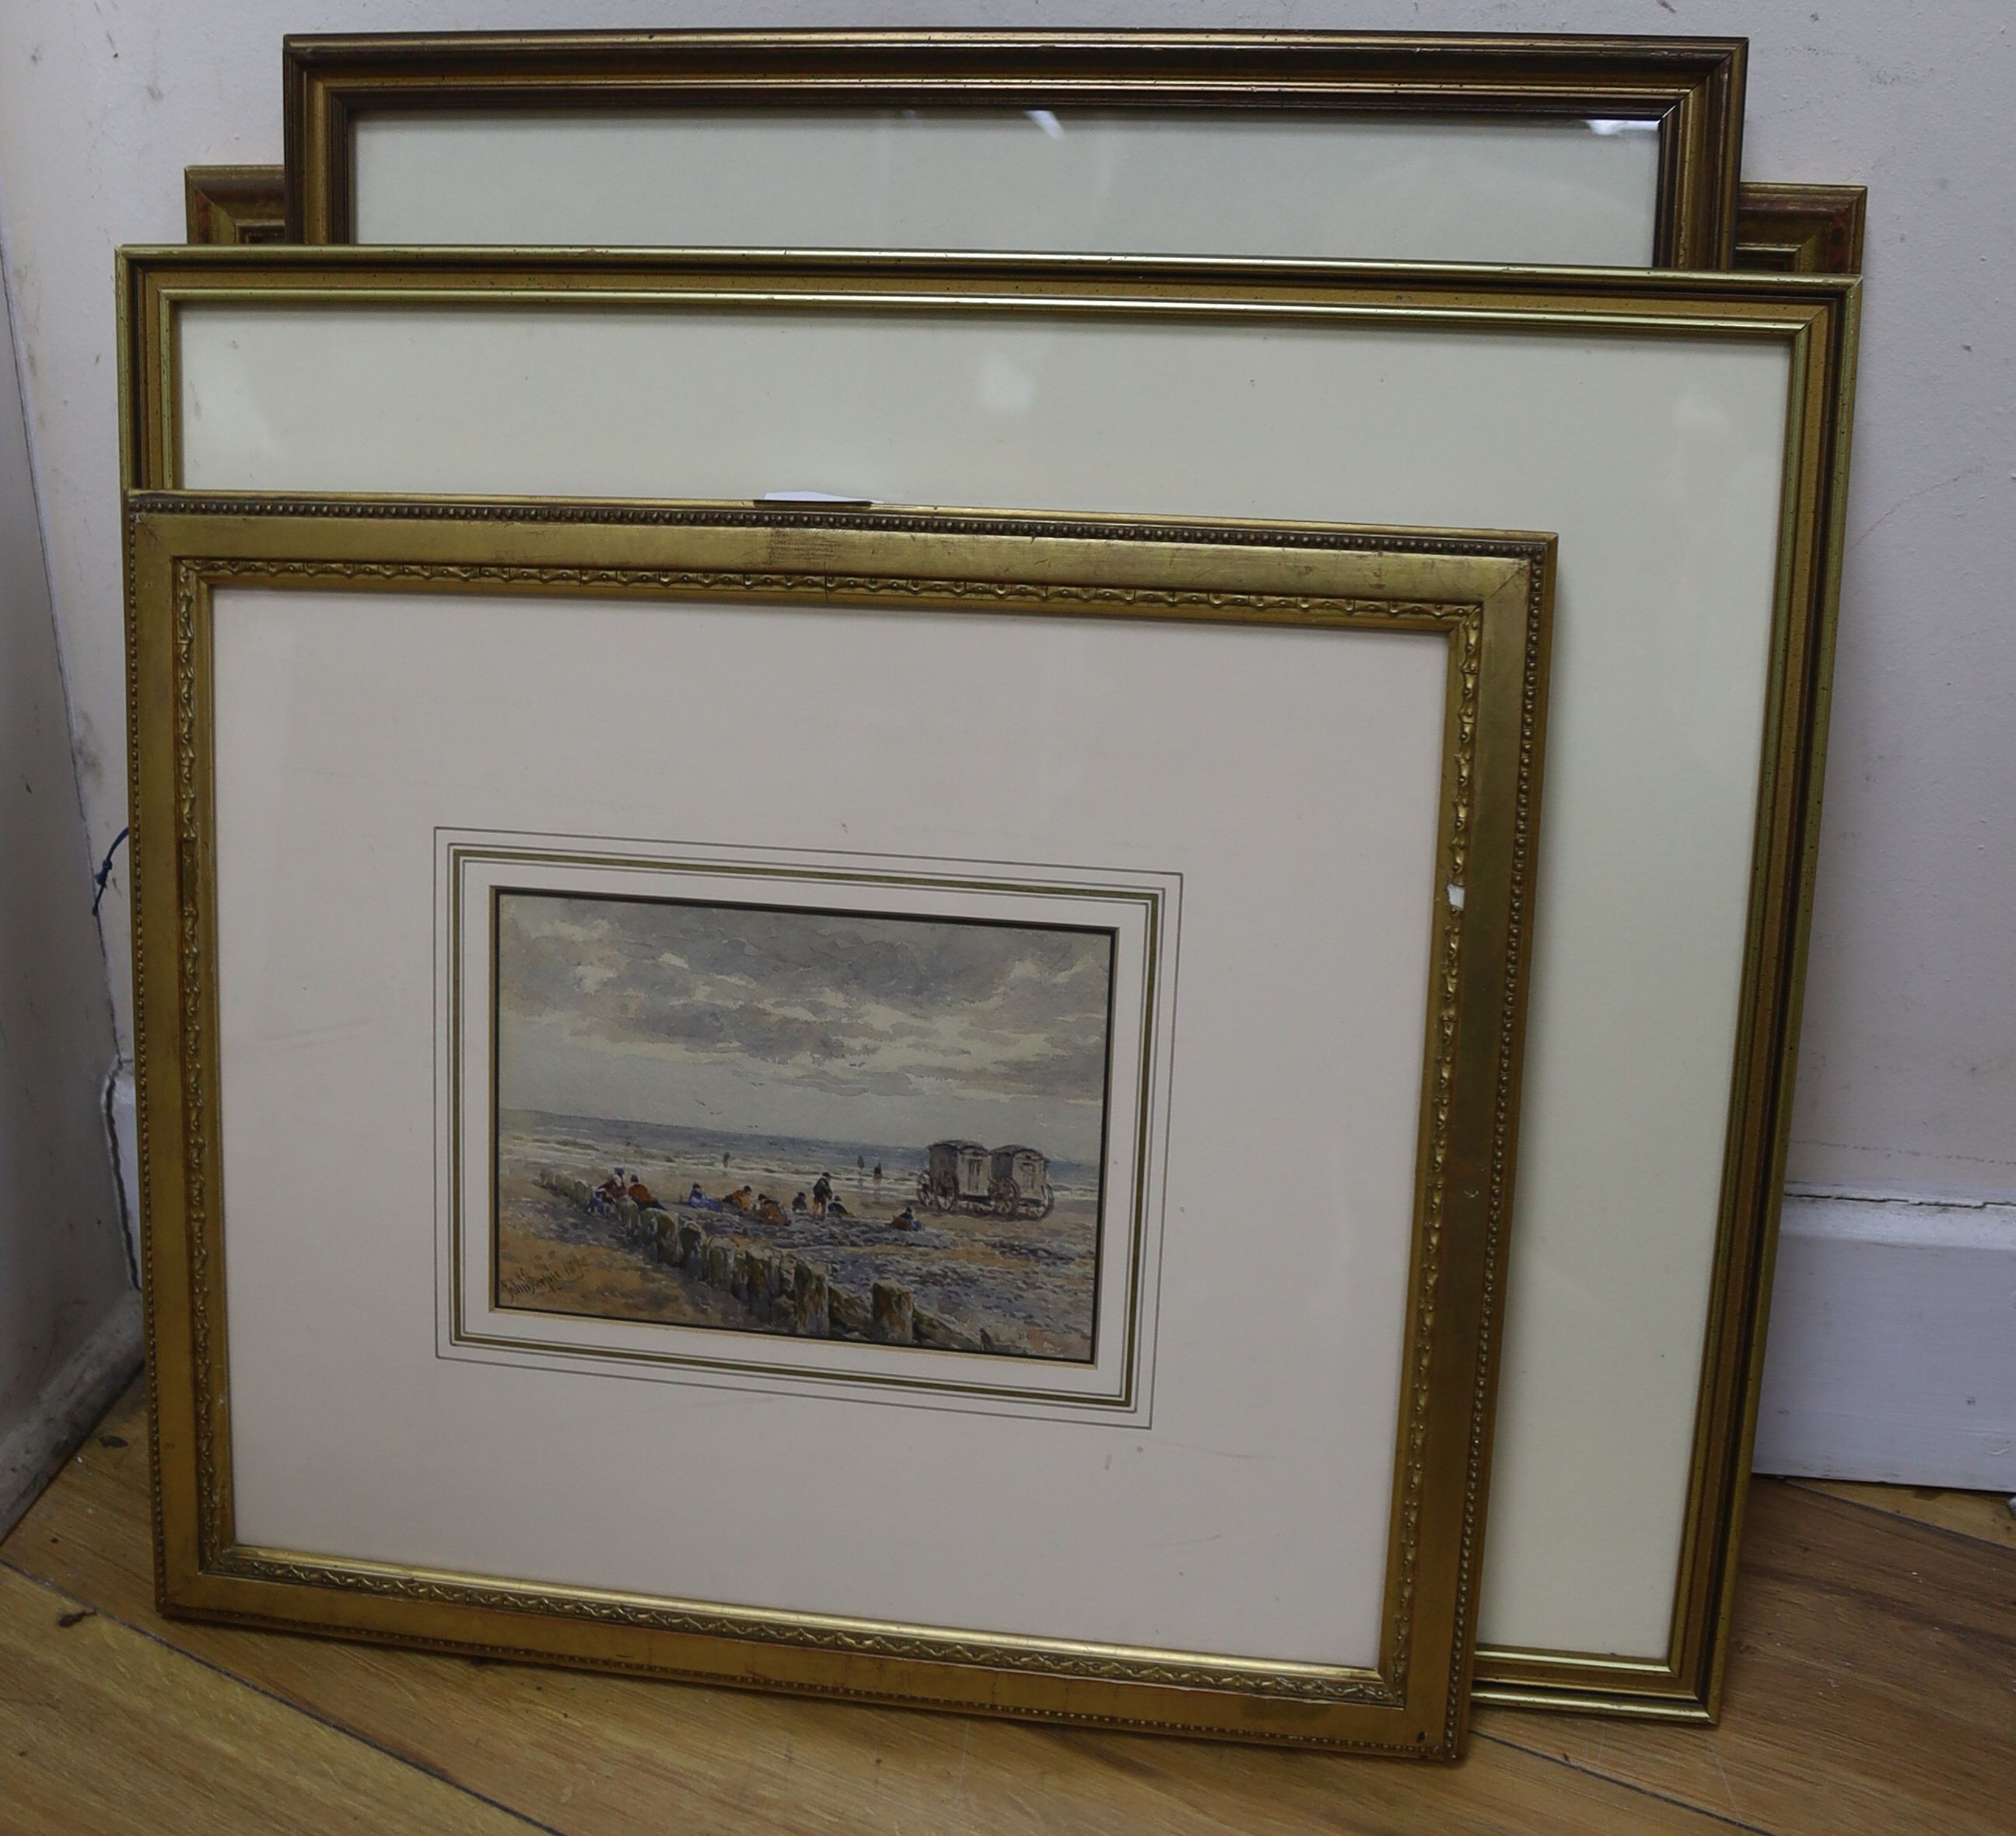 A group of five assorted watercolours; John Steeple, Beach scene; D. Addey, Harbour Master's Office; William Anderson, Scene at Stoke, Kent; Sidney Pike, landscape and